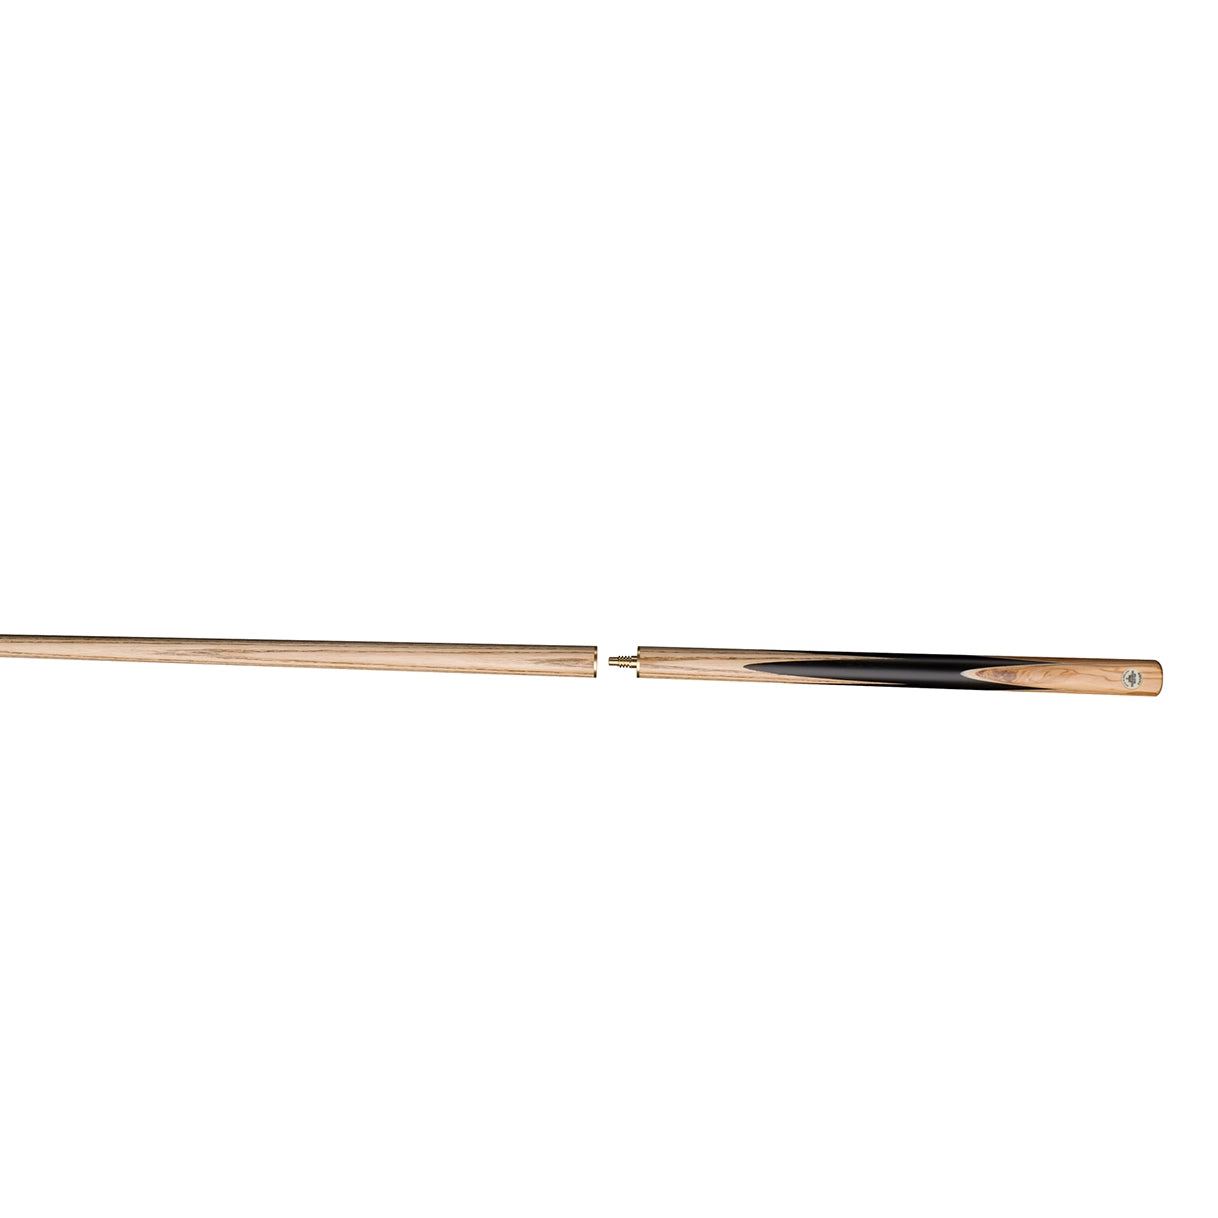 Peradon Saturn 3/4 Jointed 8 Ball Pool Cue. Seperated view